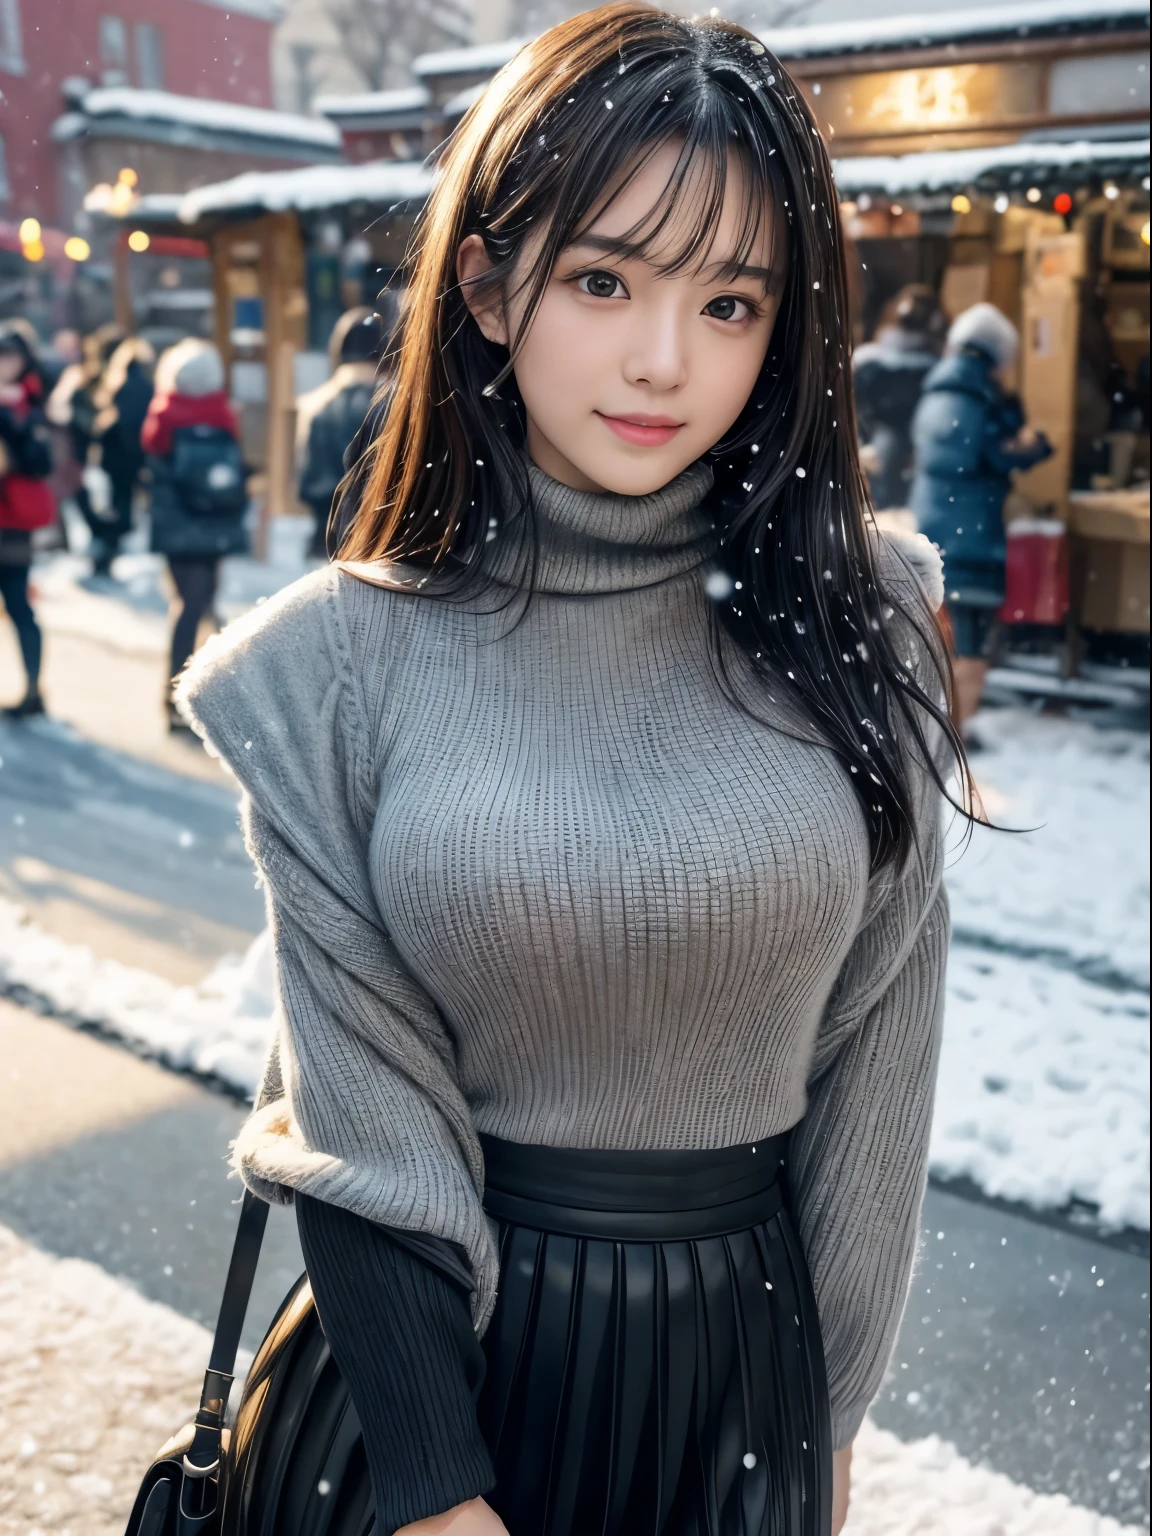 (8K,masutepiece, Raw photo,Best Quality:1.4),(photographrealistic:1.2),(extremely Detailed face),(Shiny skin),(Detailed skin),(Detailed face),(Extremely beautiful face),1girl in,Looking at Viewer,Japanese ido(actor hair,Medium Hair,Straight hair,asymmetrical bangs,Smile,glamor,large breasted jacket, Turtleneck sweater, Pleated skirt:1.2), Christmas Market, (It&#39;s snowing、It&#39;s piling up:1.2),High Position,Professional Lighting